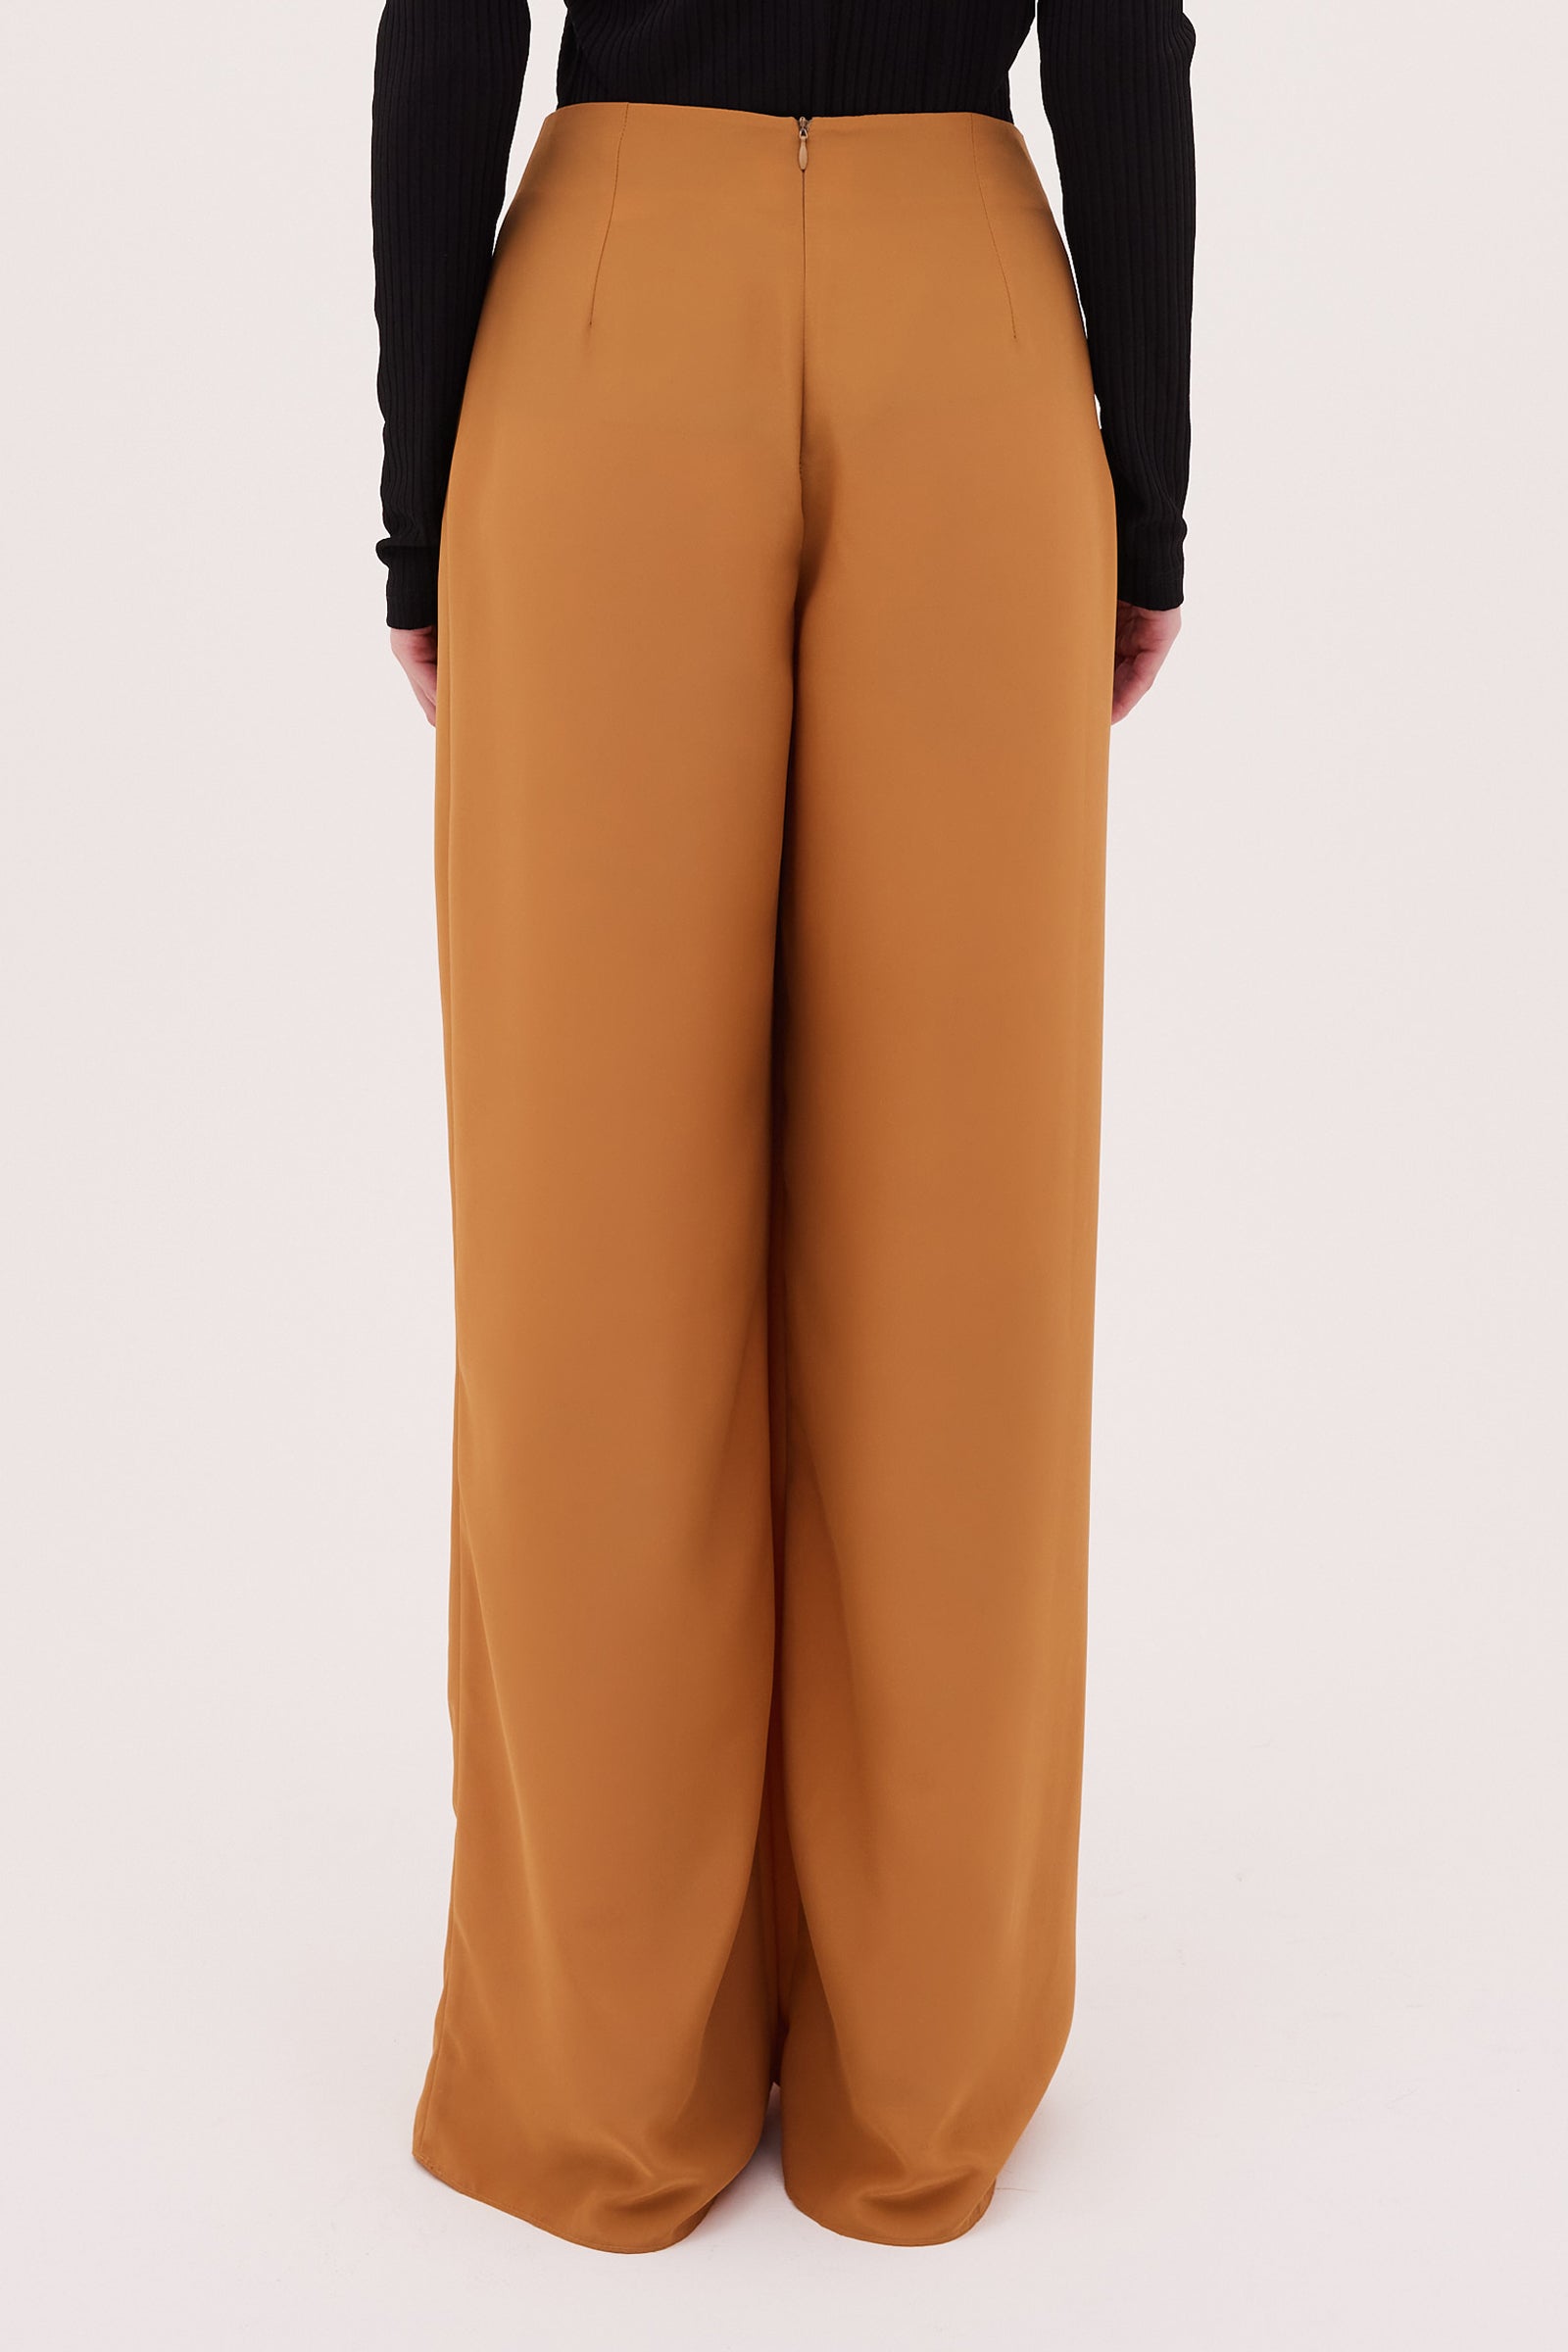 TOFFEE CDC DEVIATION PANT